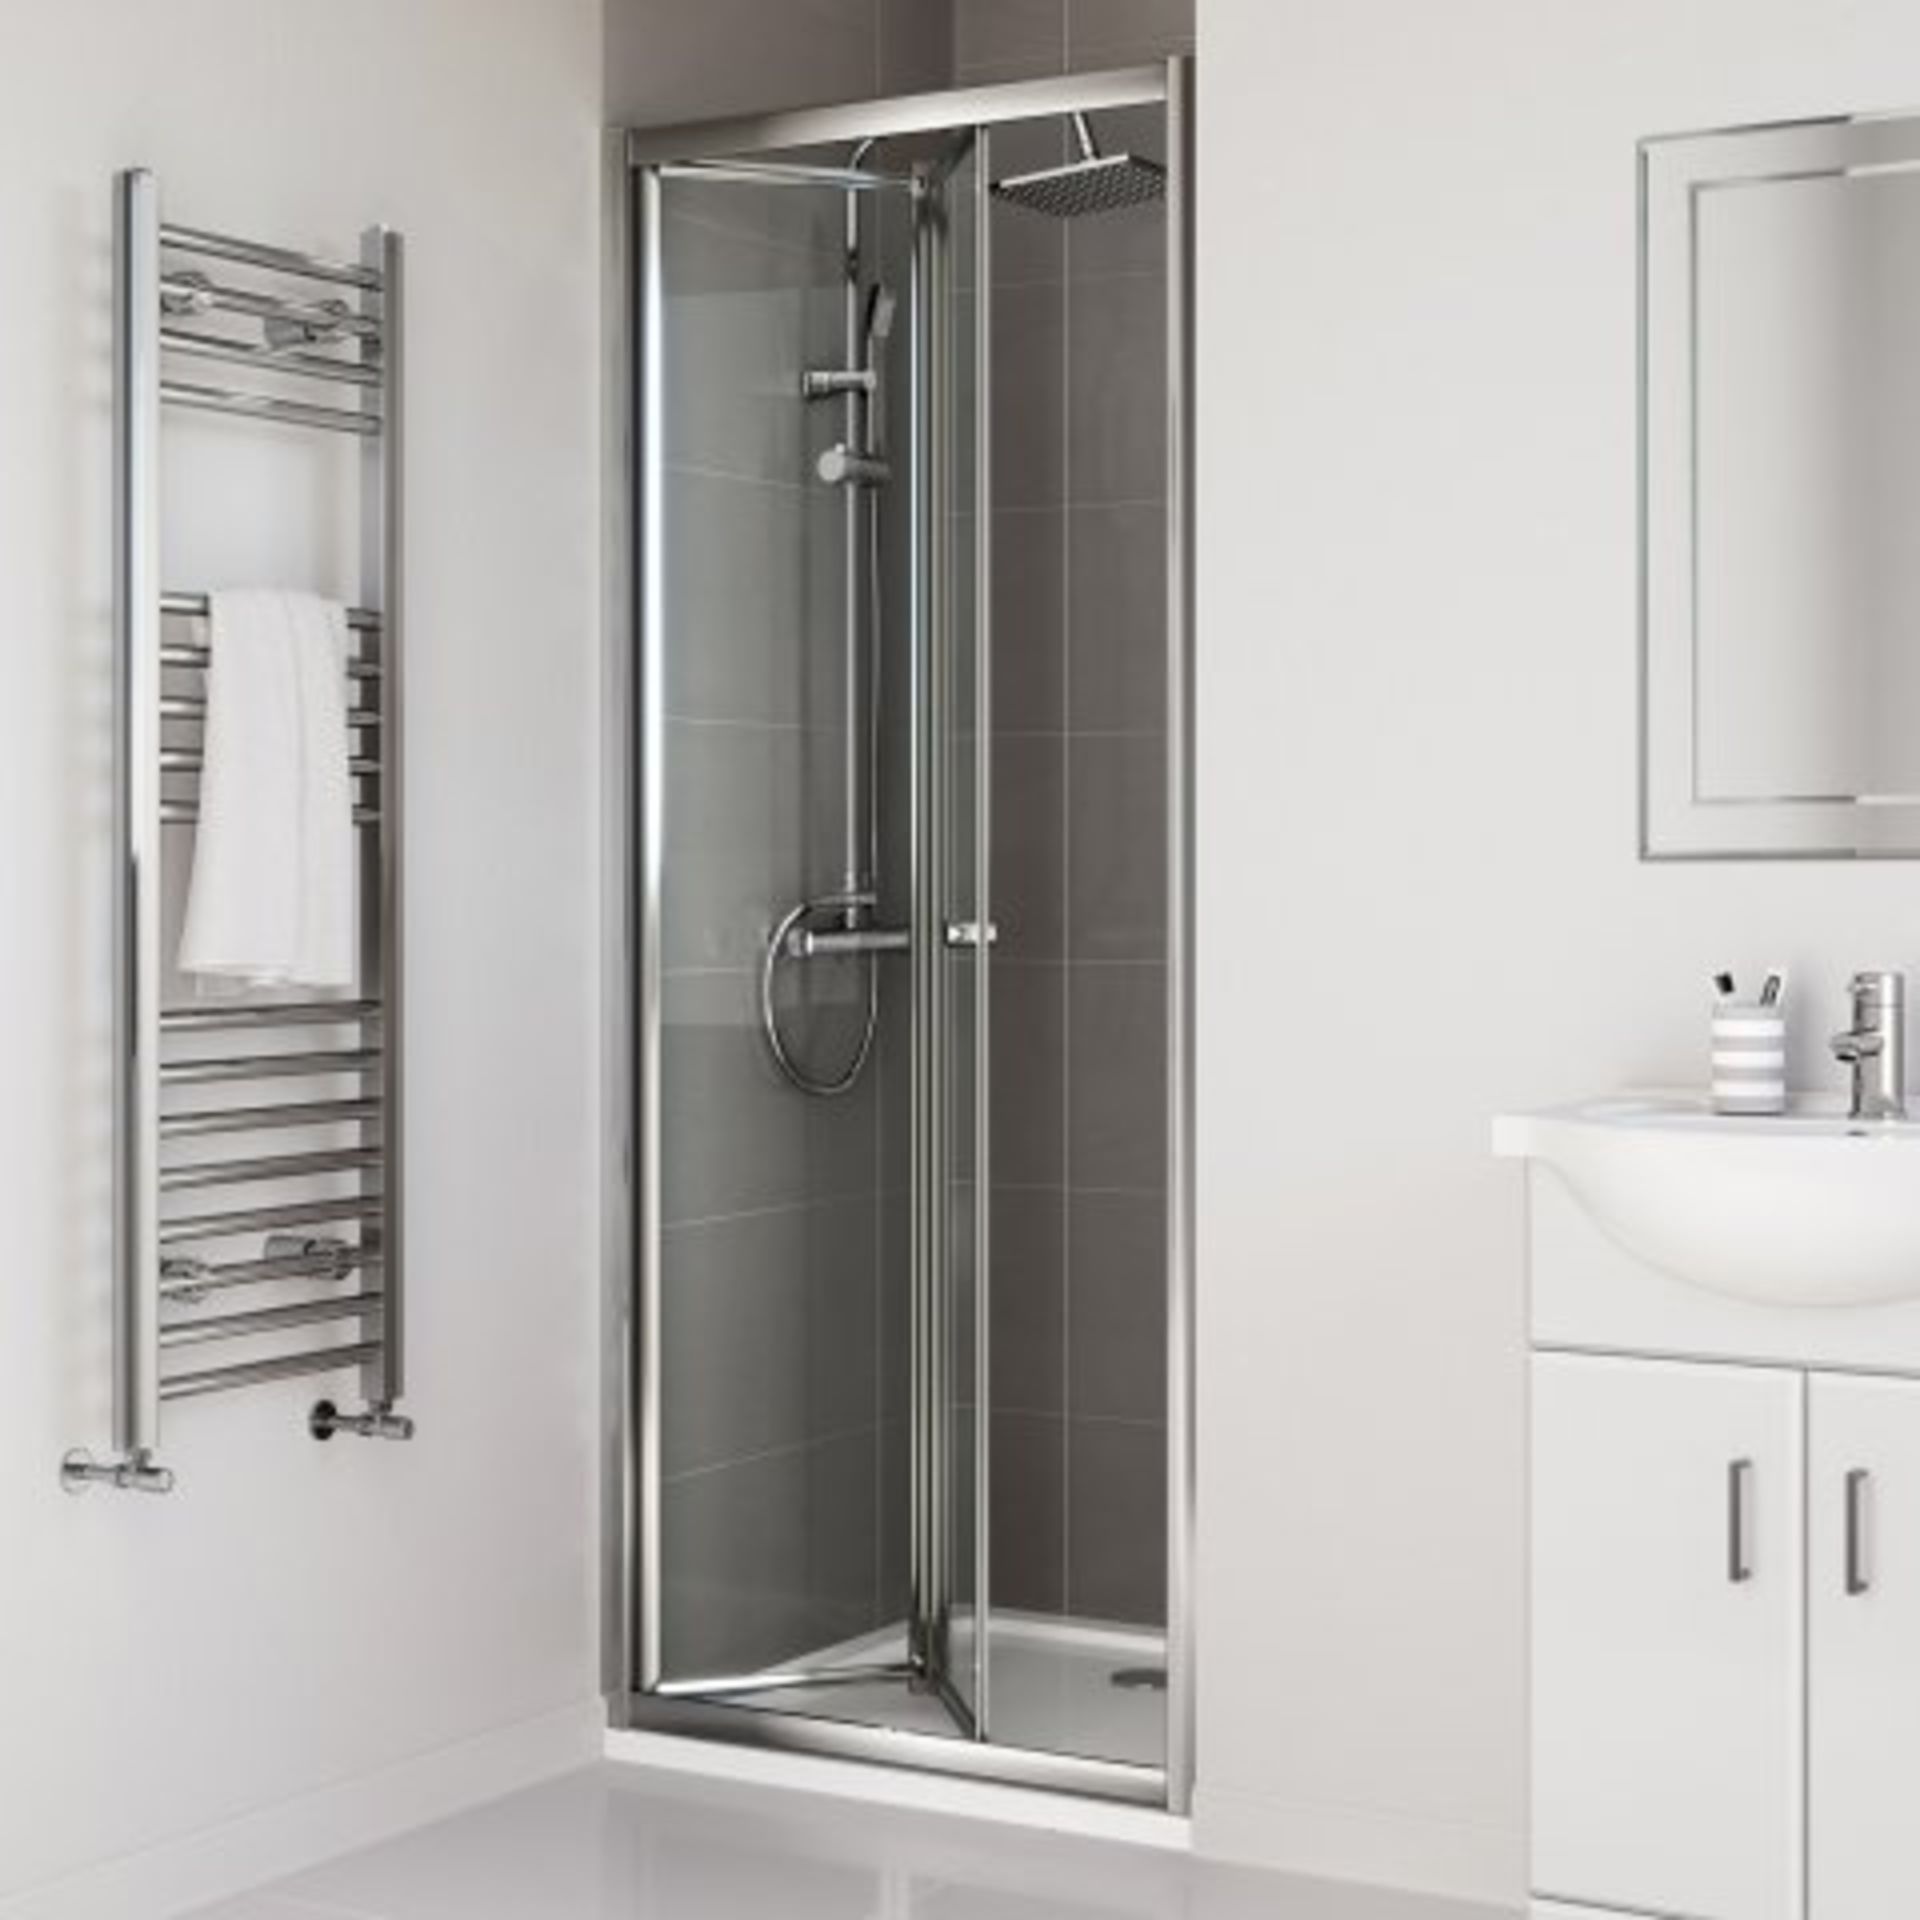 (H246) 800mm - Elements Bi Fold Shower Door. RRP £299.99. Do you have an awkward nook or a tricky - Image 3 of 3